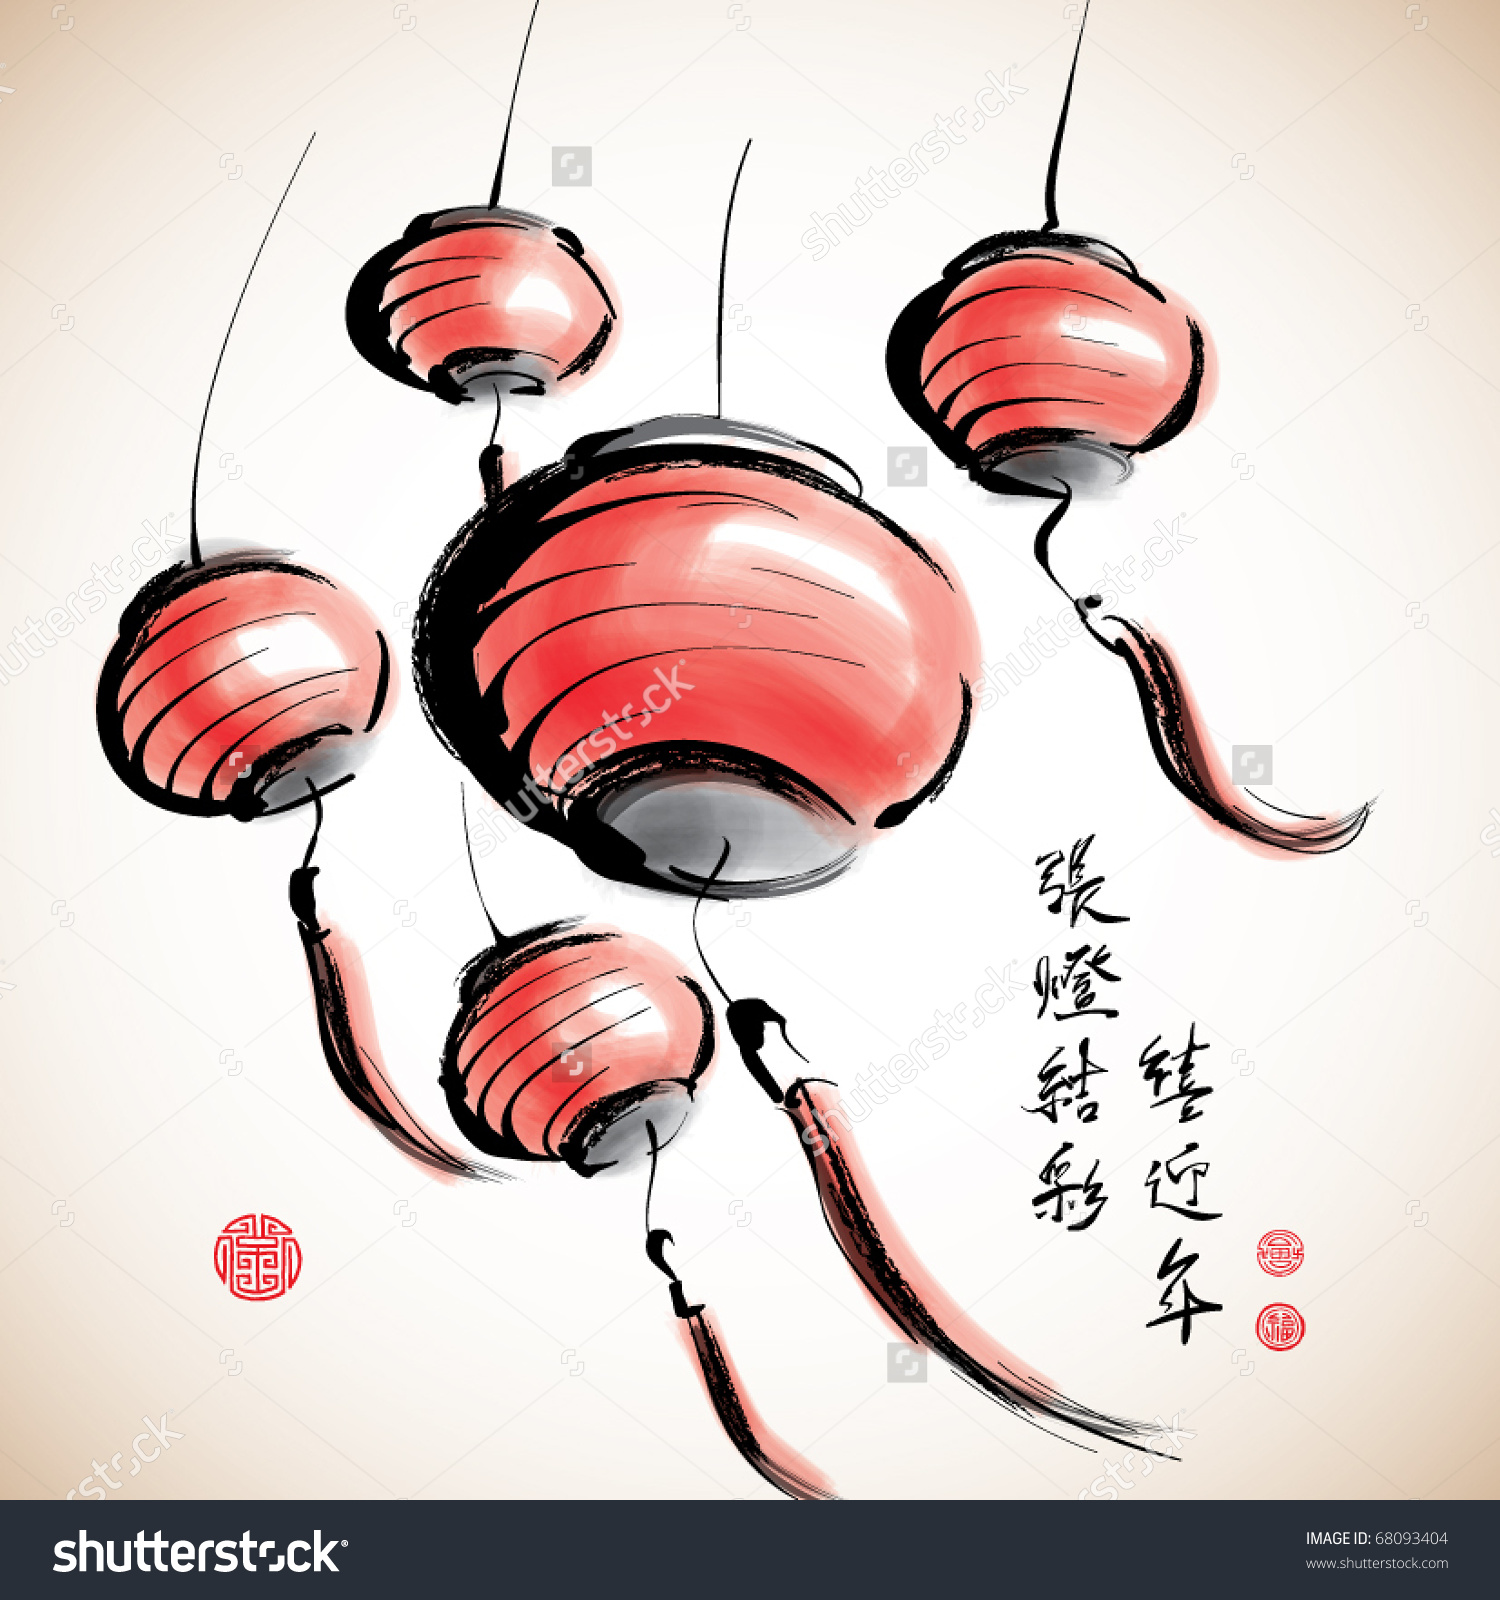 Vector Ink Painting Chinese Lantern Greeting Stock Vector 68093404.